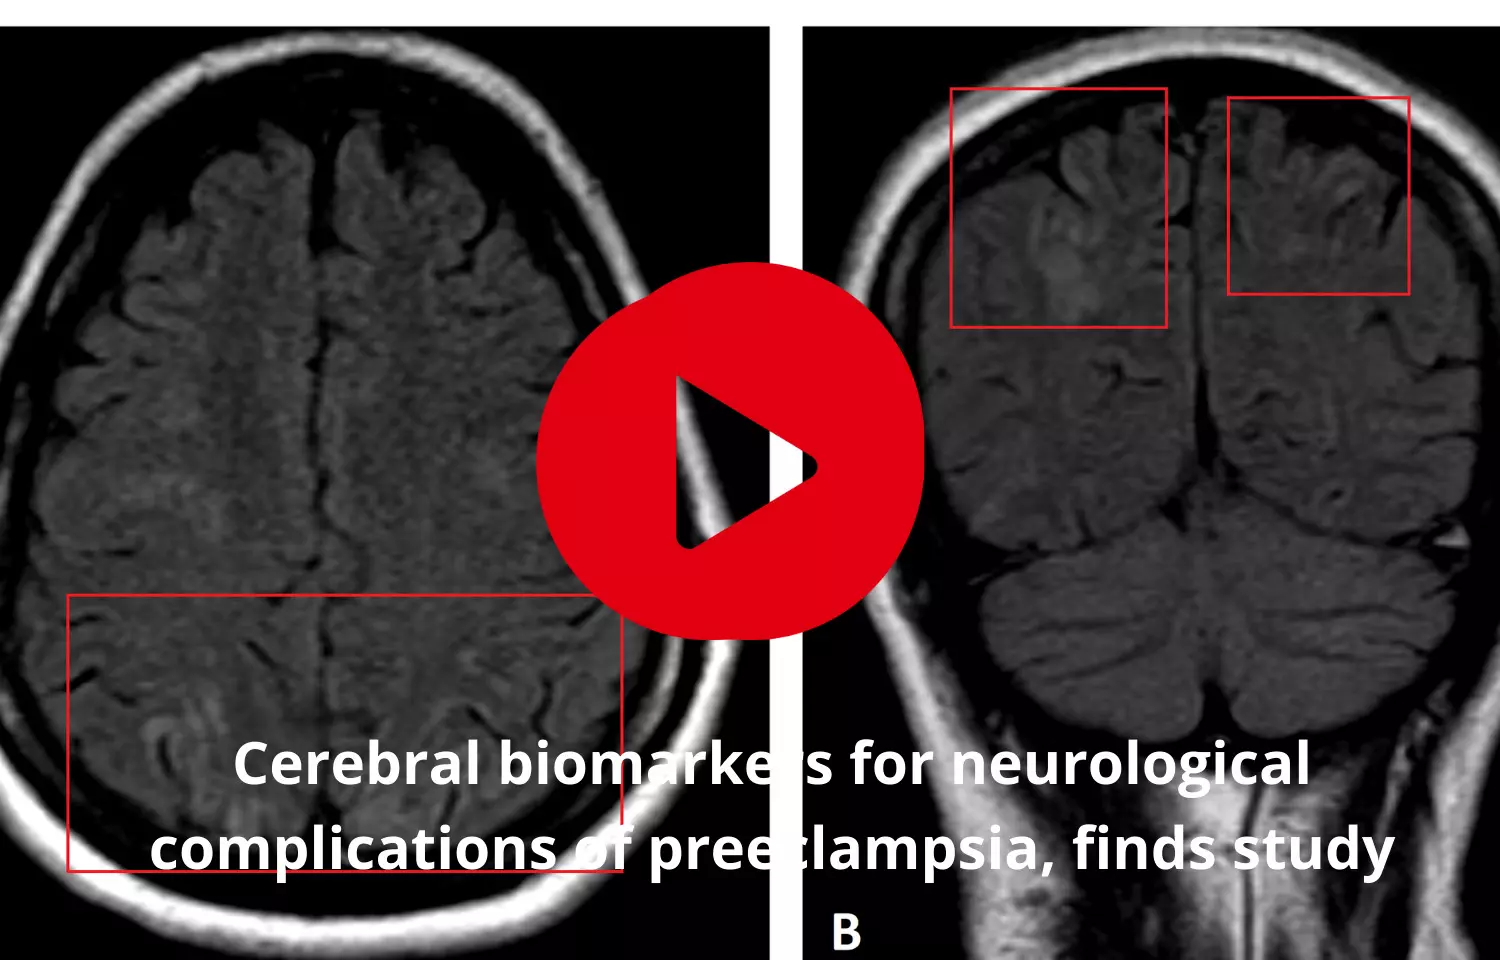 Cerebral biomarkers to find neurological complications of preeclampsia